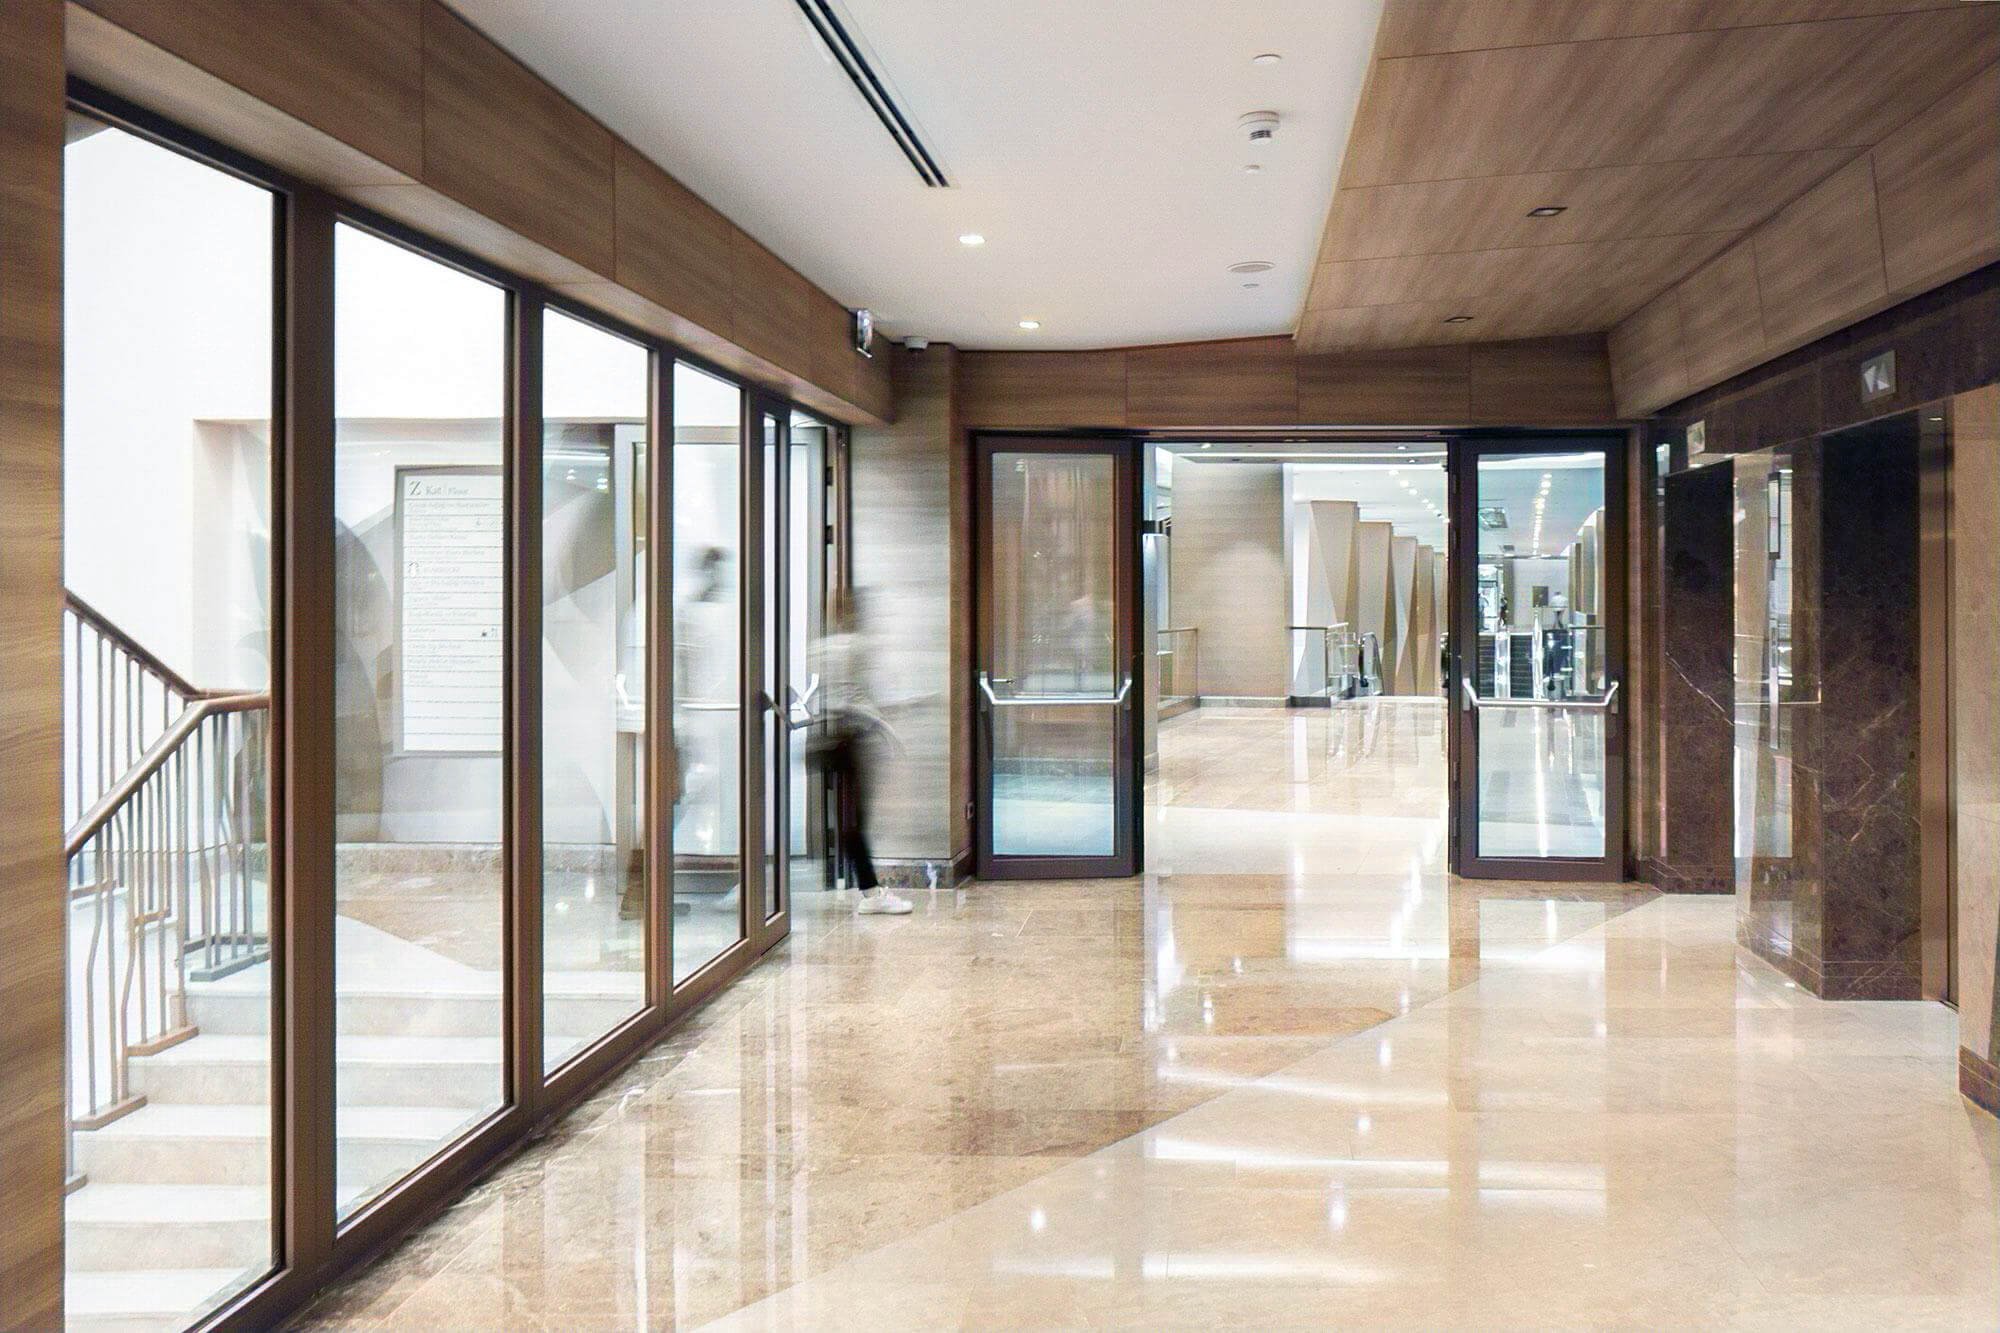 Fire rated glass Doors